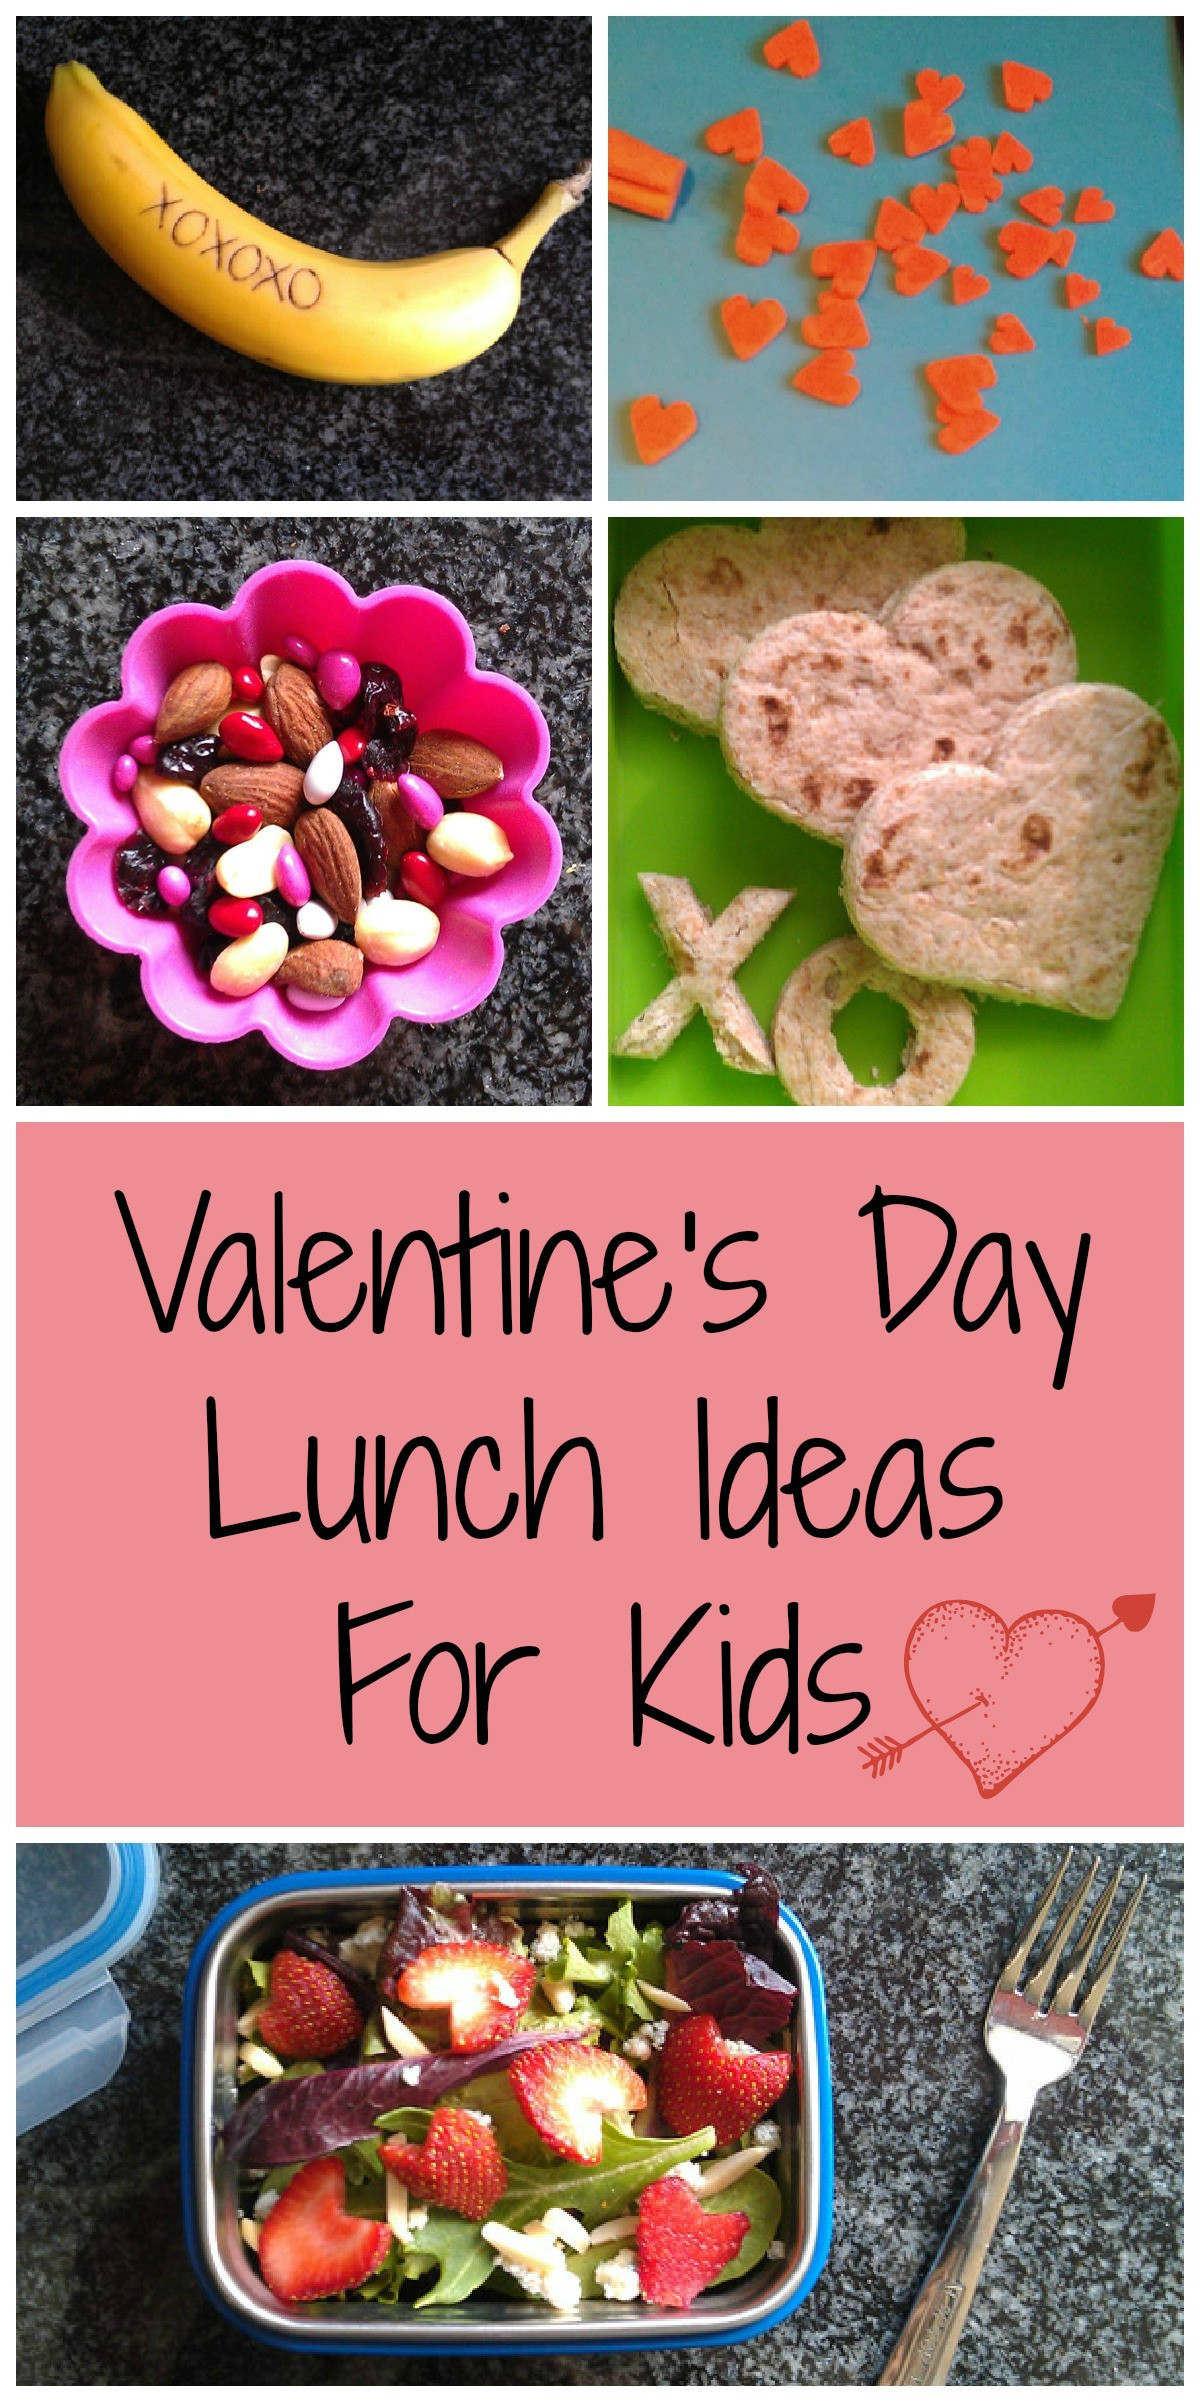 Valentines Day Ideas For Toddlers
 6 Healthy Valentine s Day Lunch Ideas